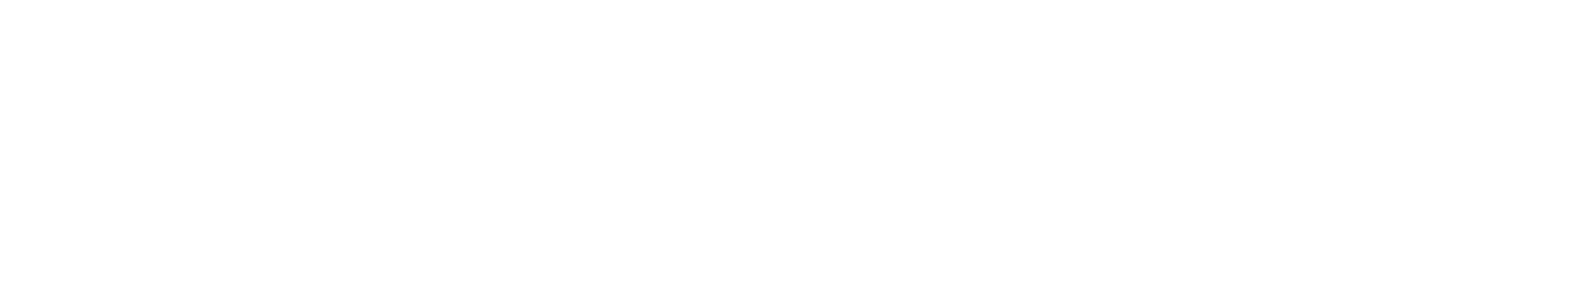 Citizen Watch logo in transparent PNG and vectorized SVG formats